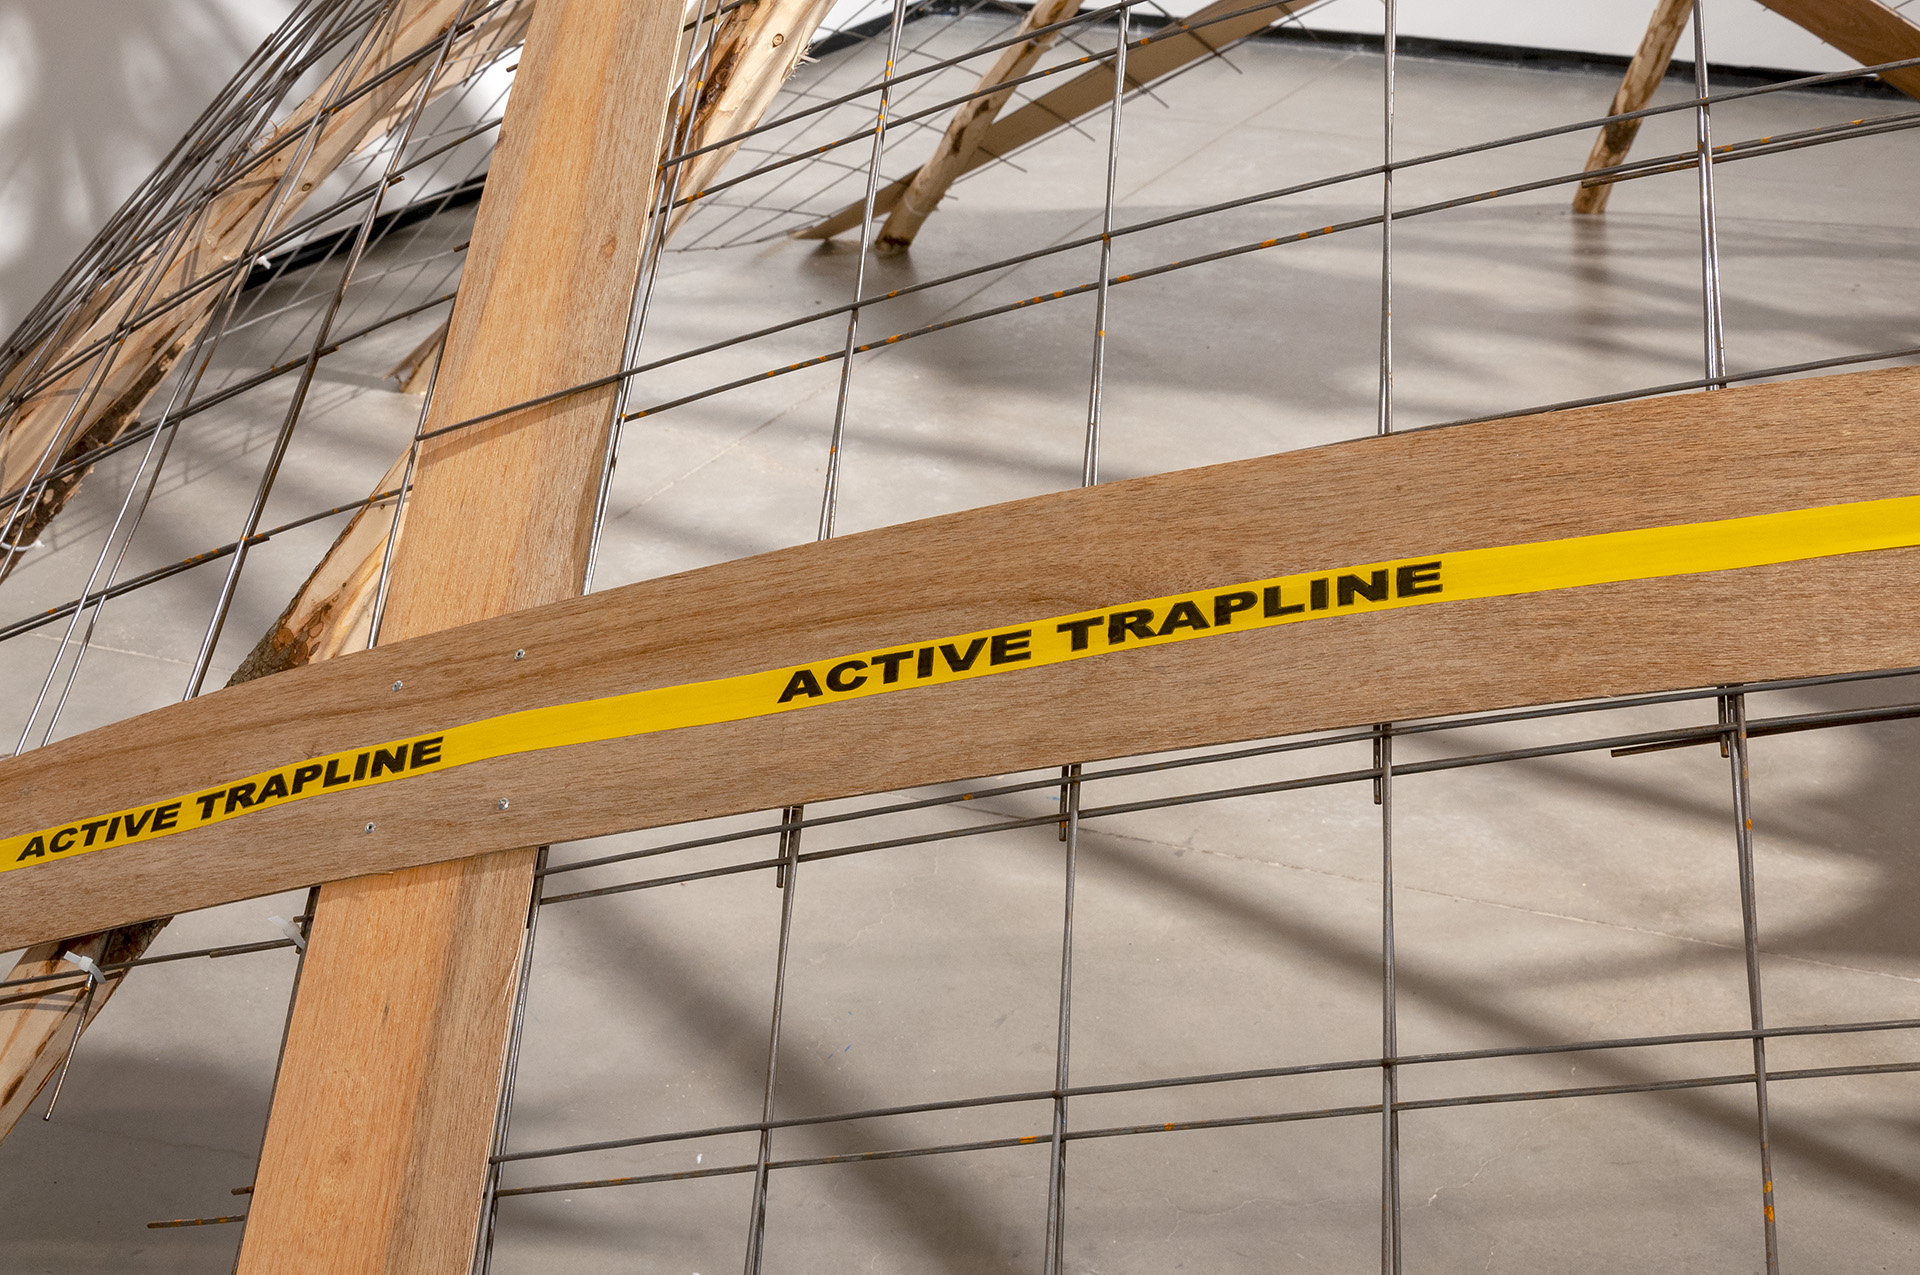 Detail of a wire mesh structure with wooden crossbeams with a band of “Active trapline” text